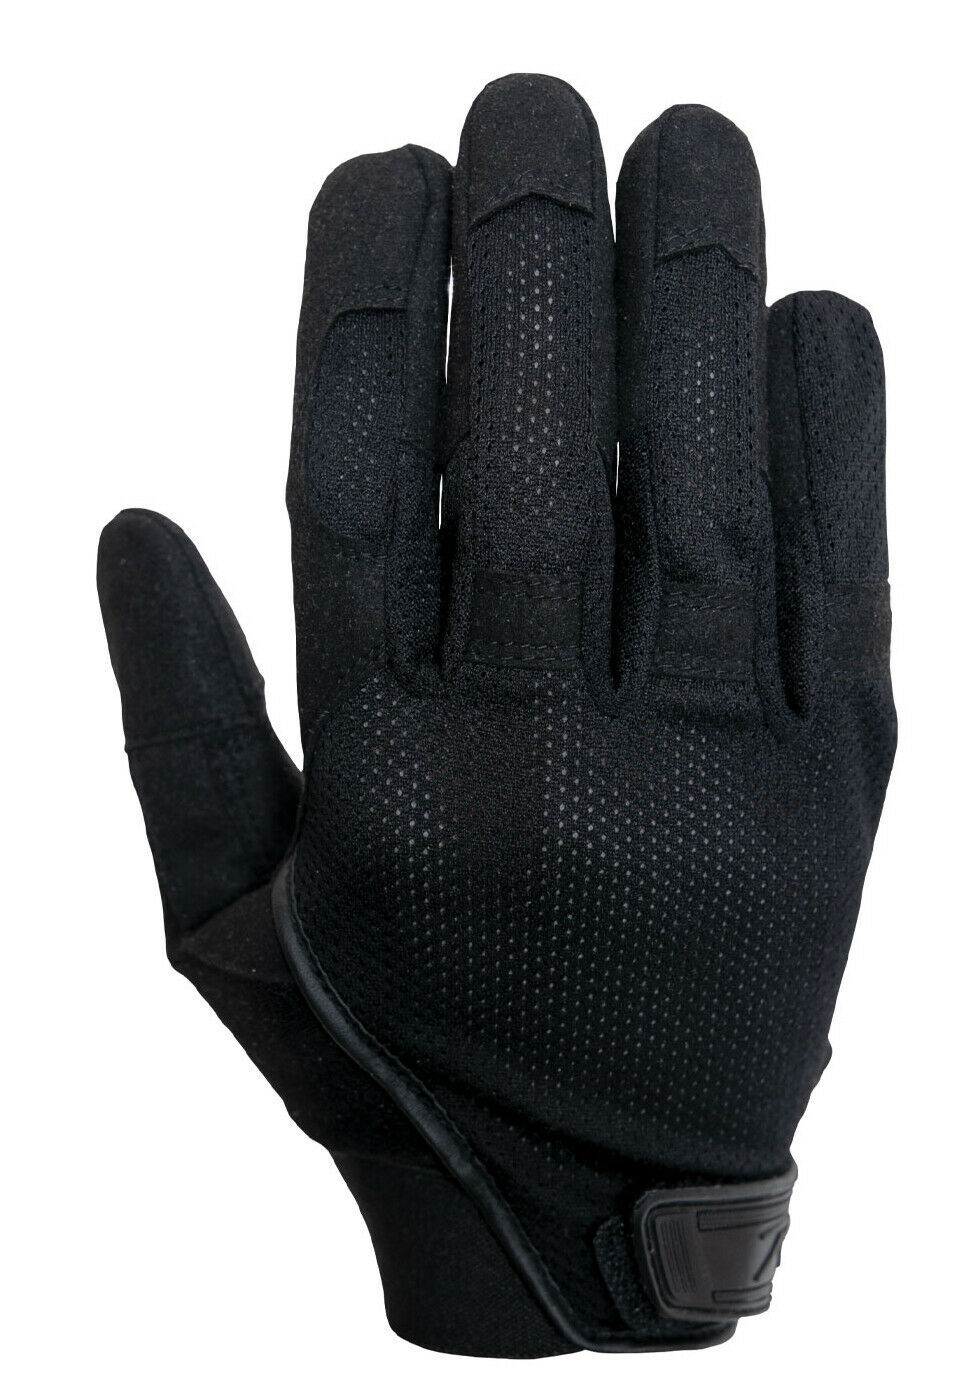 Rothco Lightweight Mesh Tactical Glove - Black